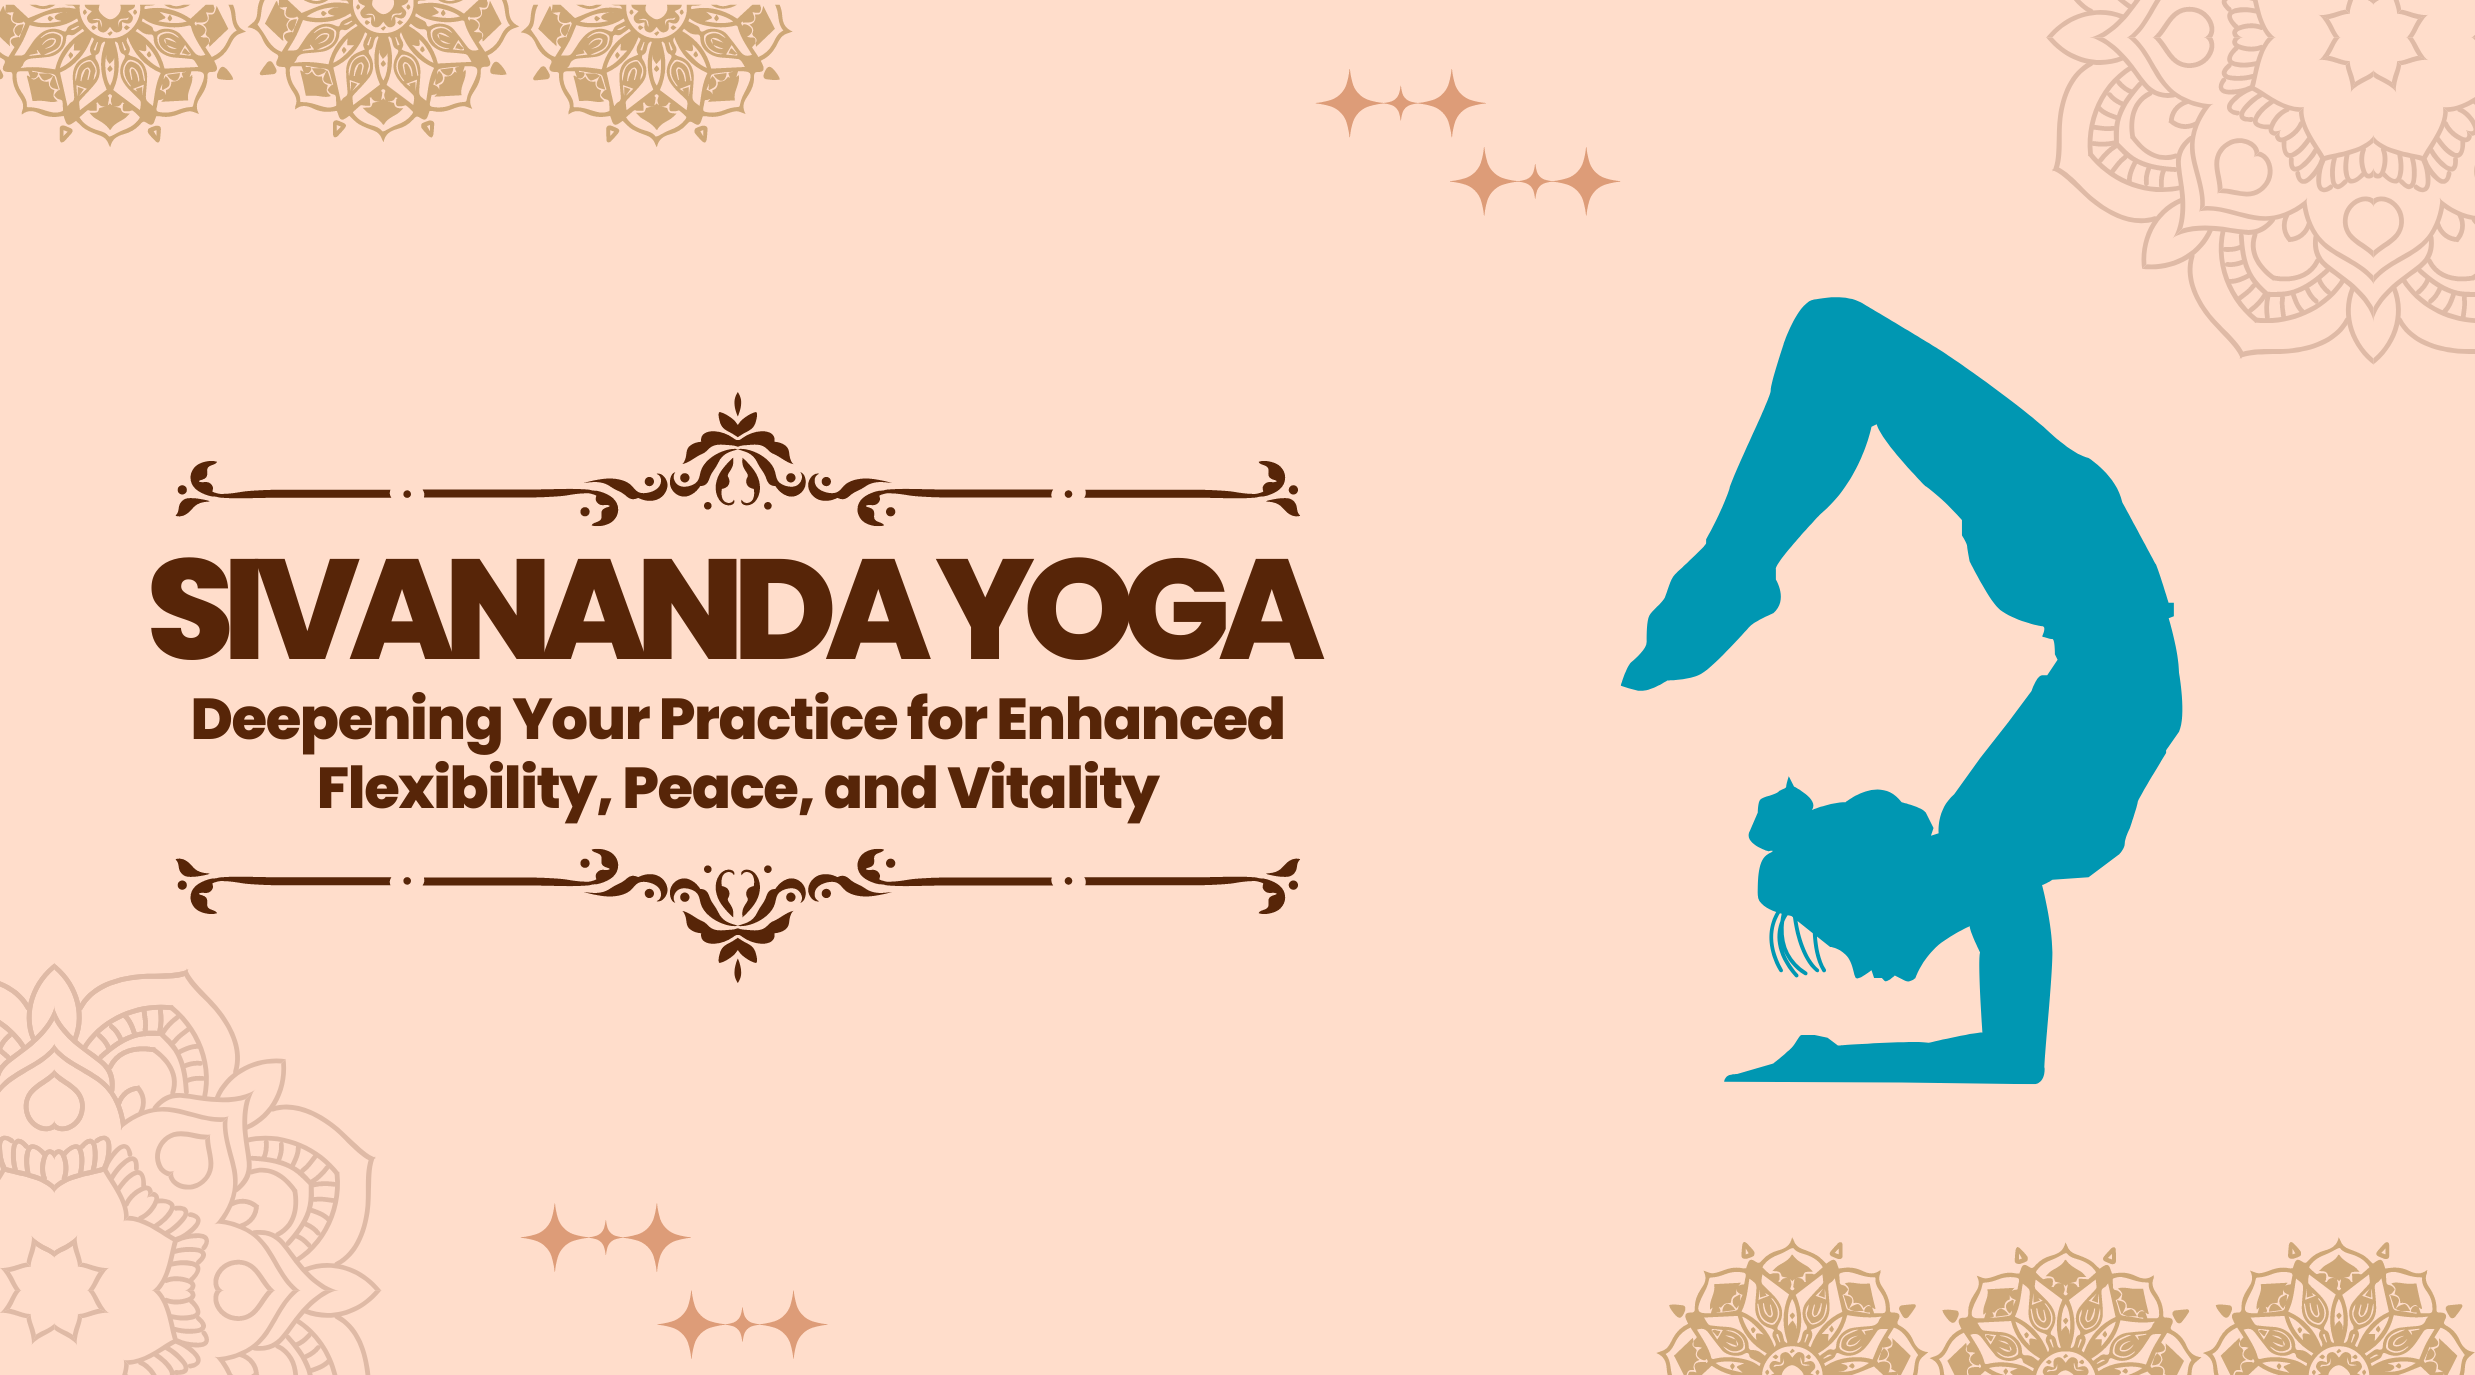 Sivananda Yoga: Deepening Your Practice for better well-being.